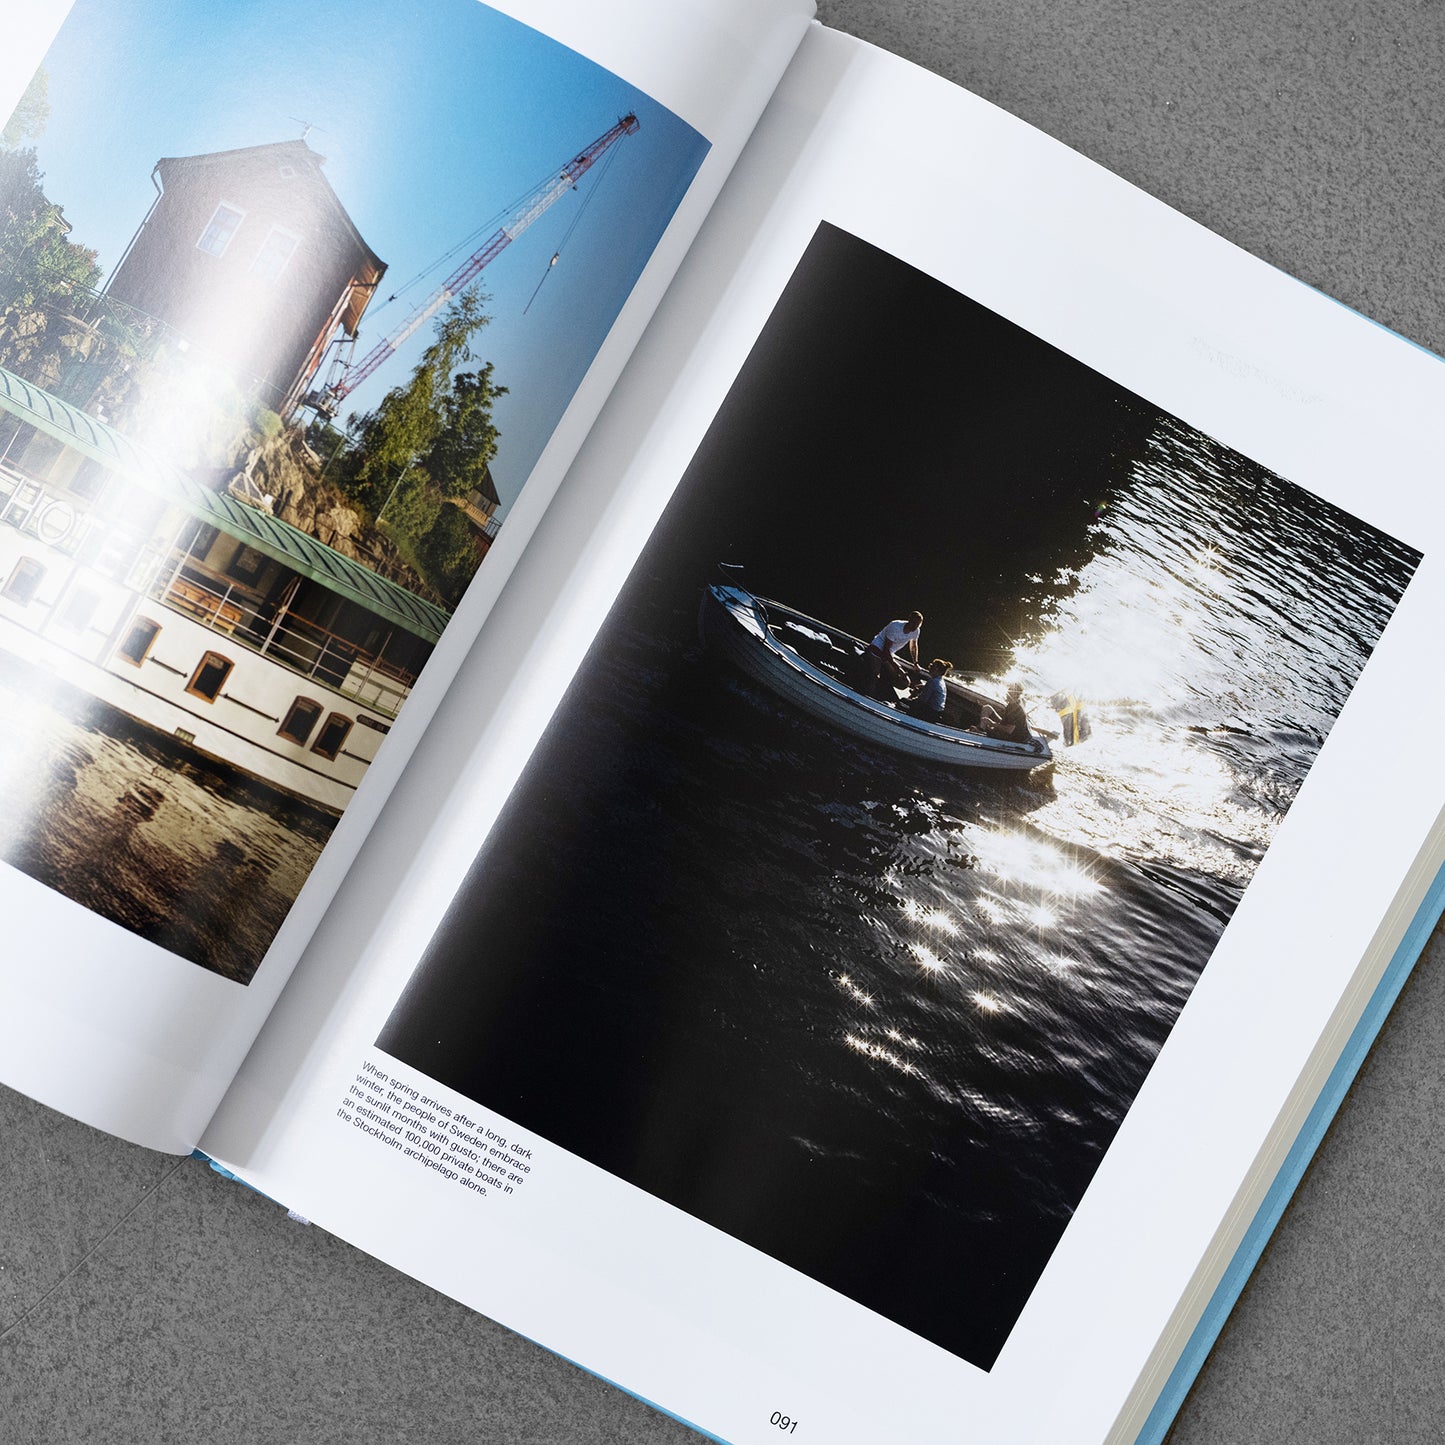 Monocle Book of the Nordics: An Exploration of Design, Business, Food & Fashion